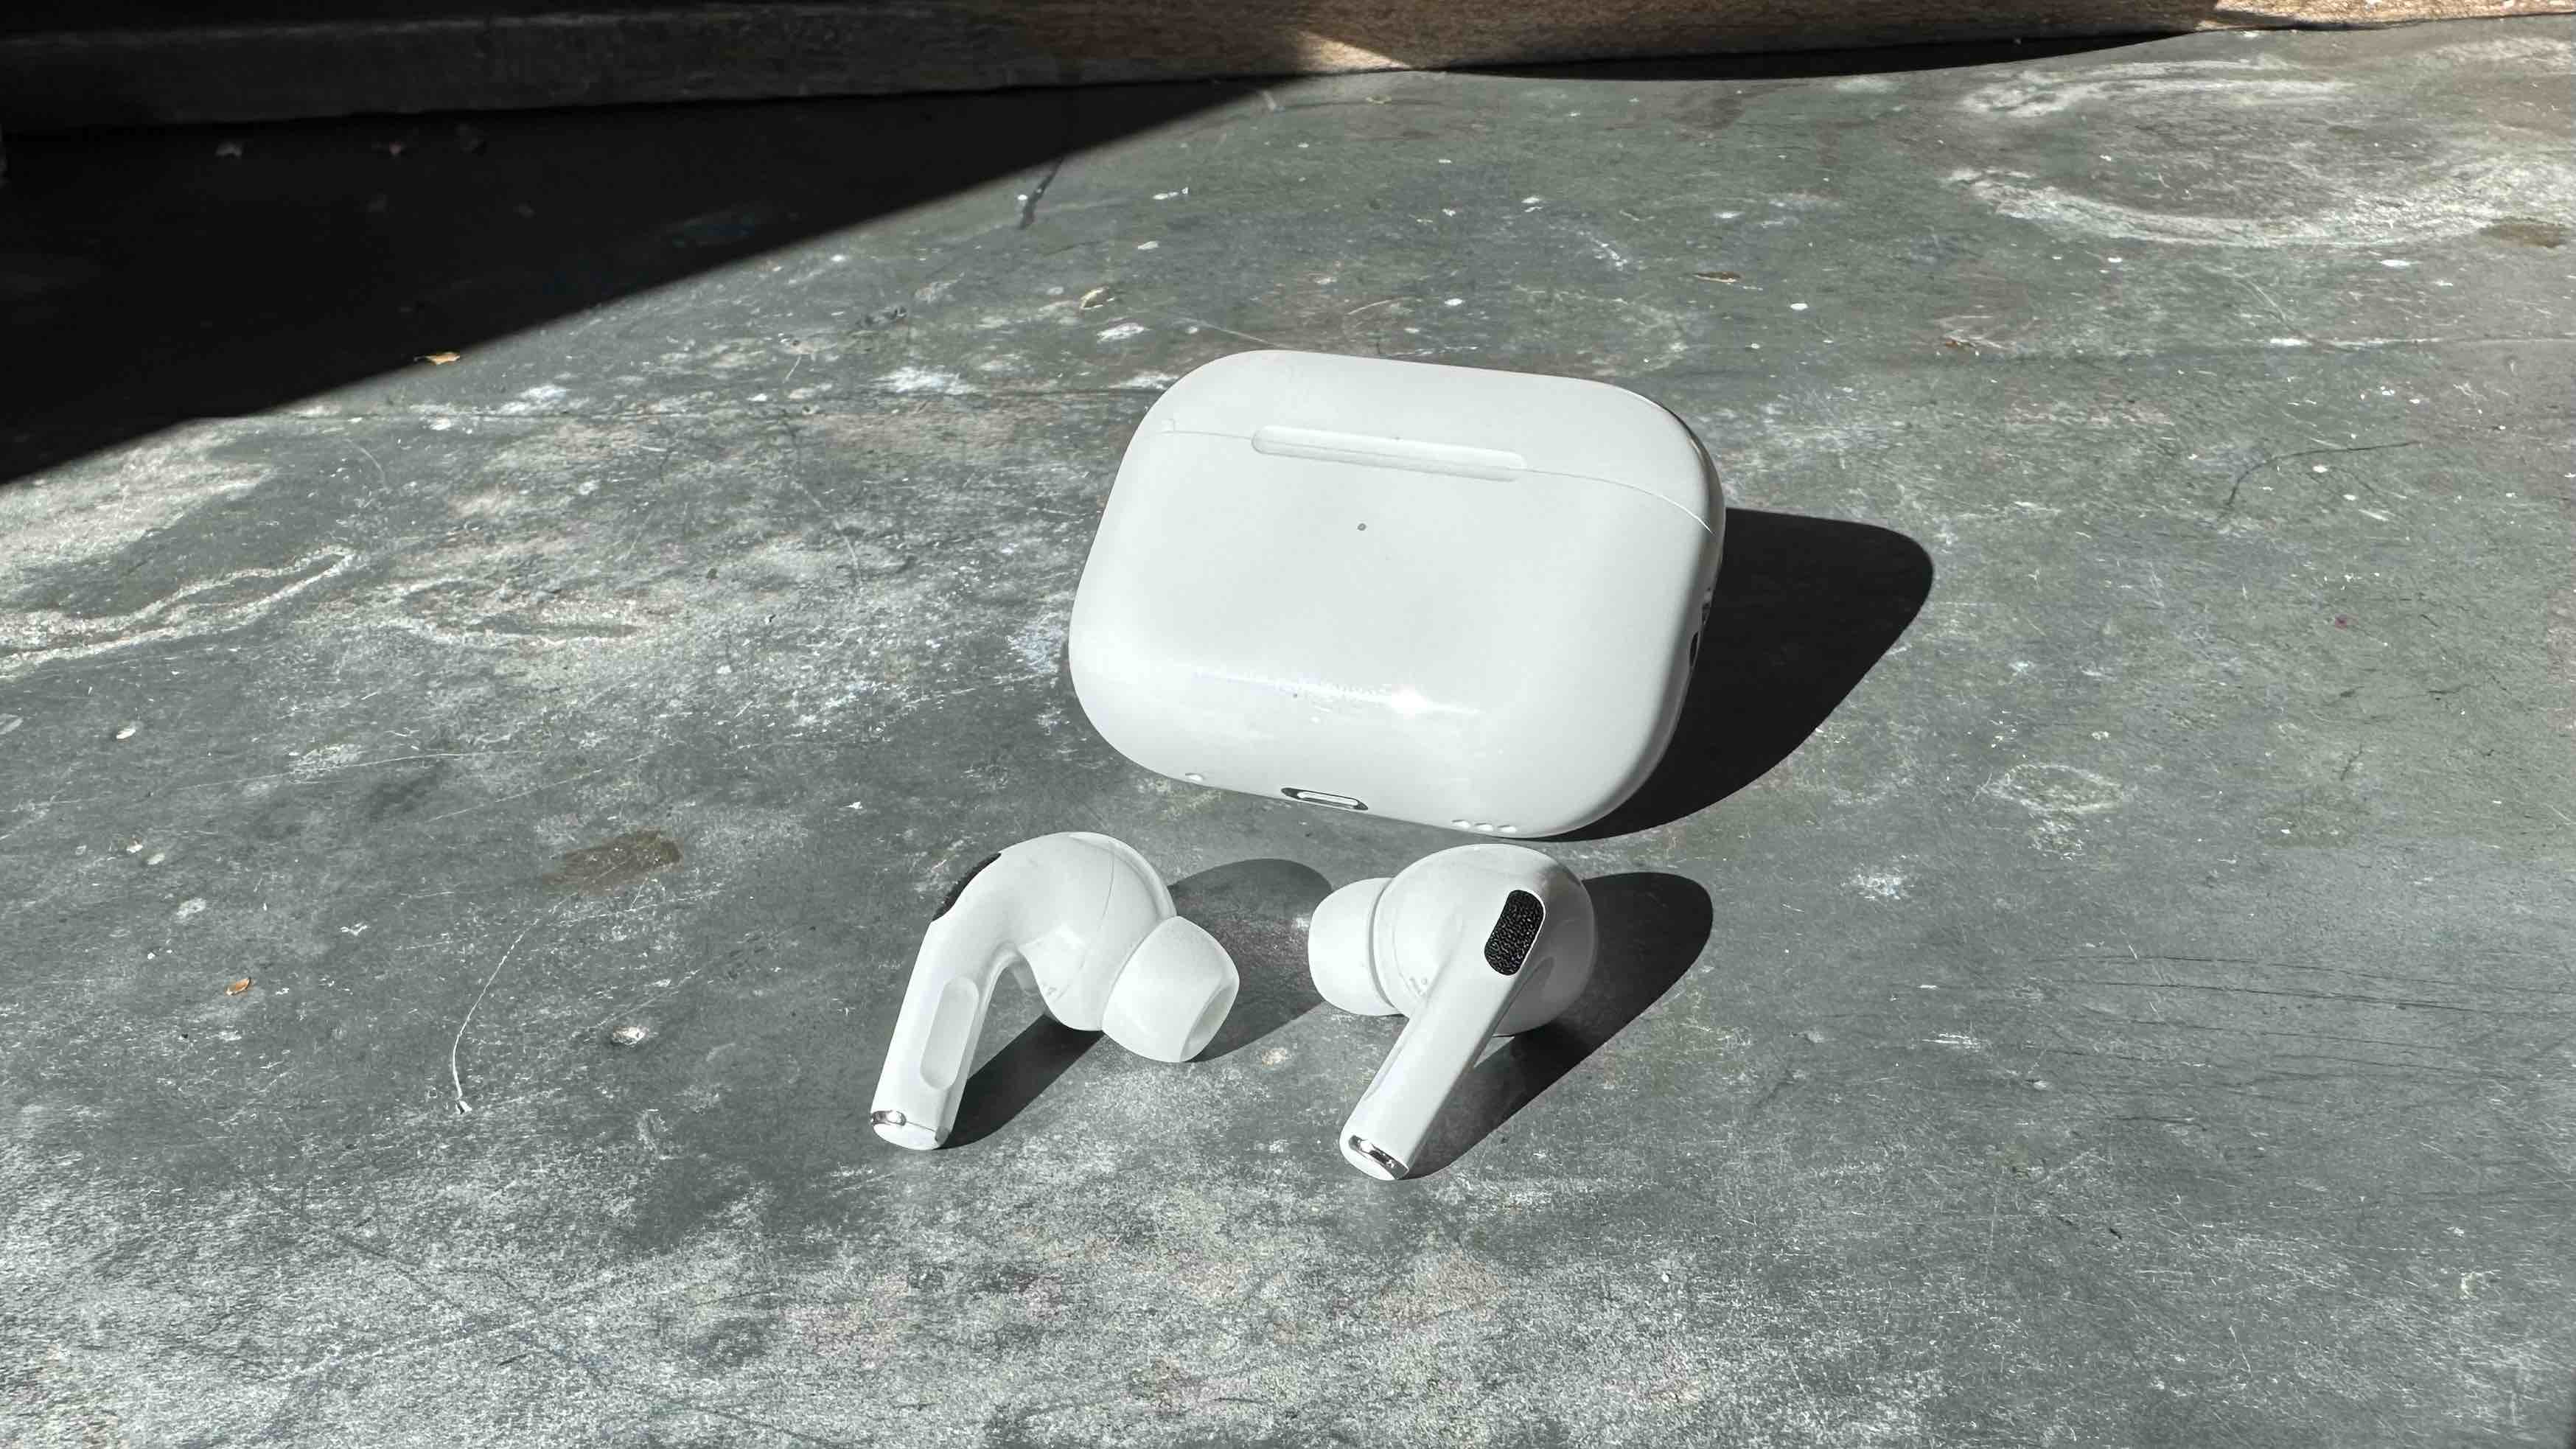 Clean AirPods Pro charging case